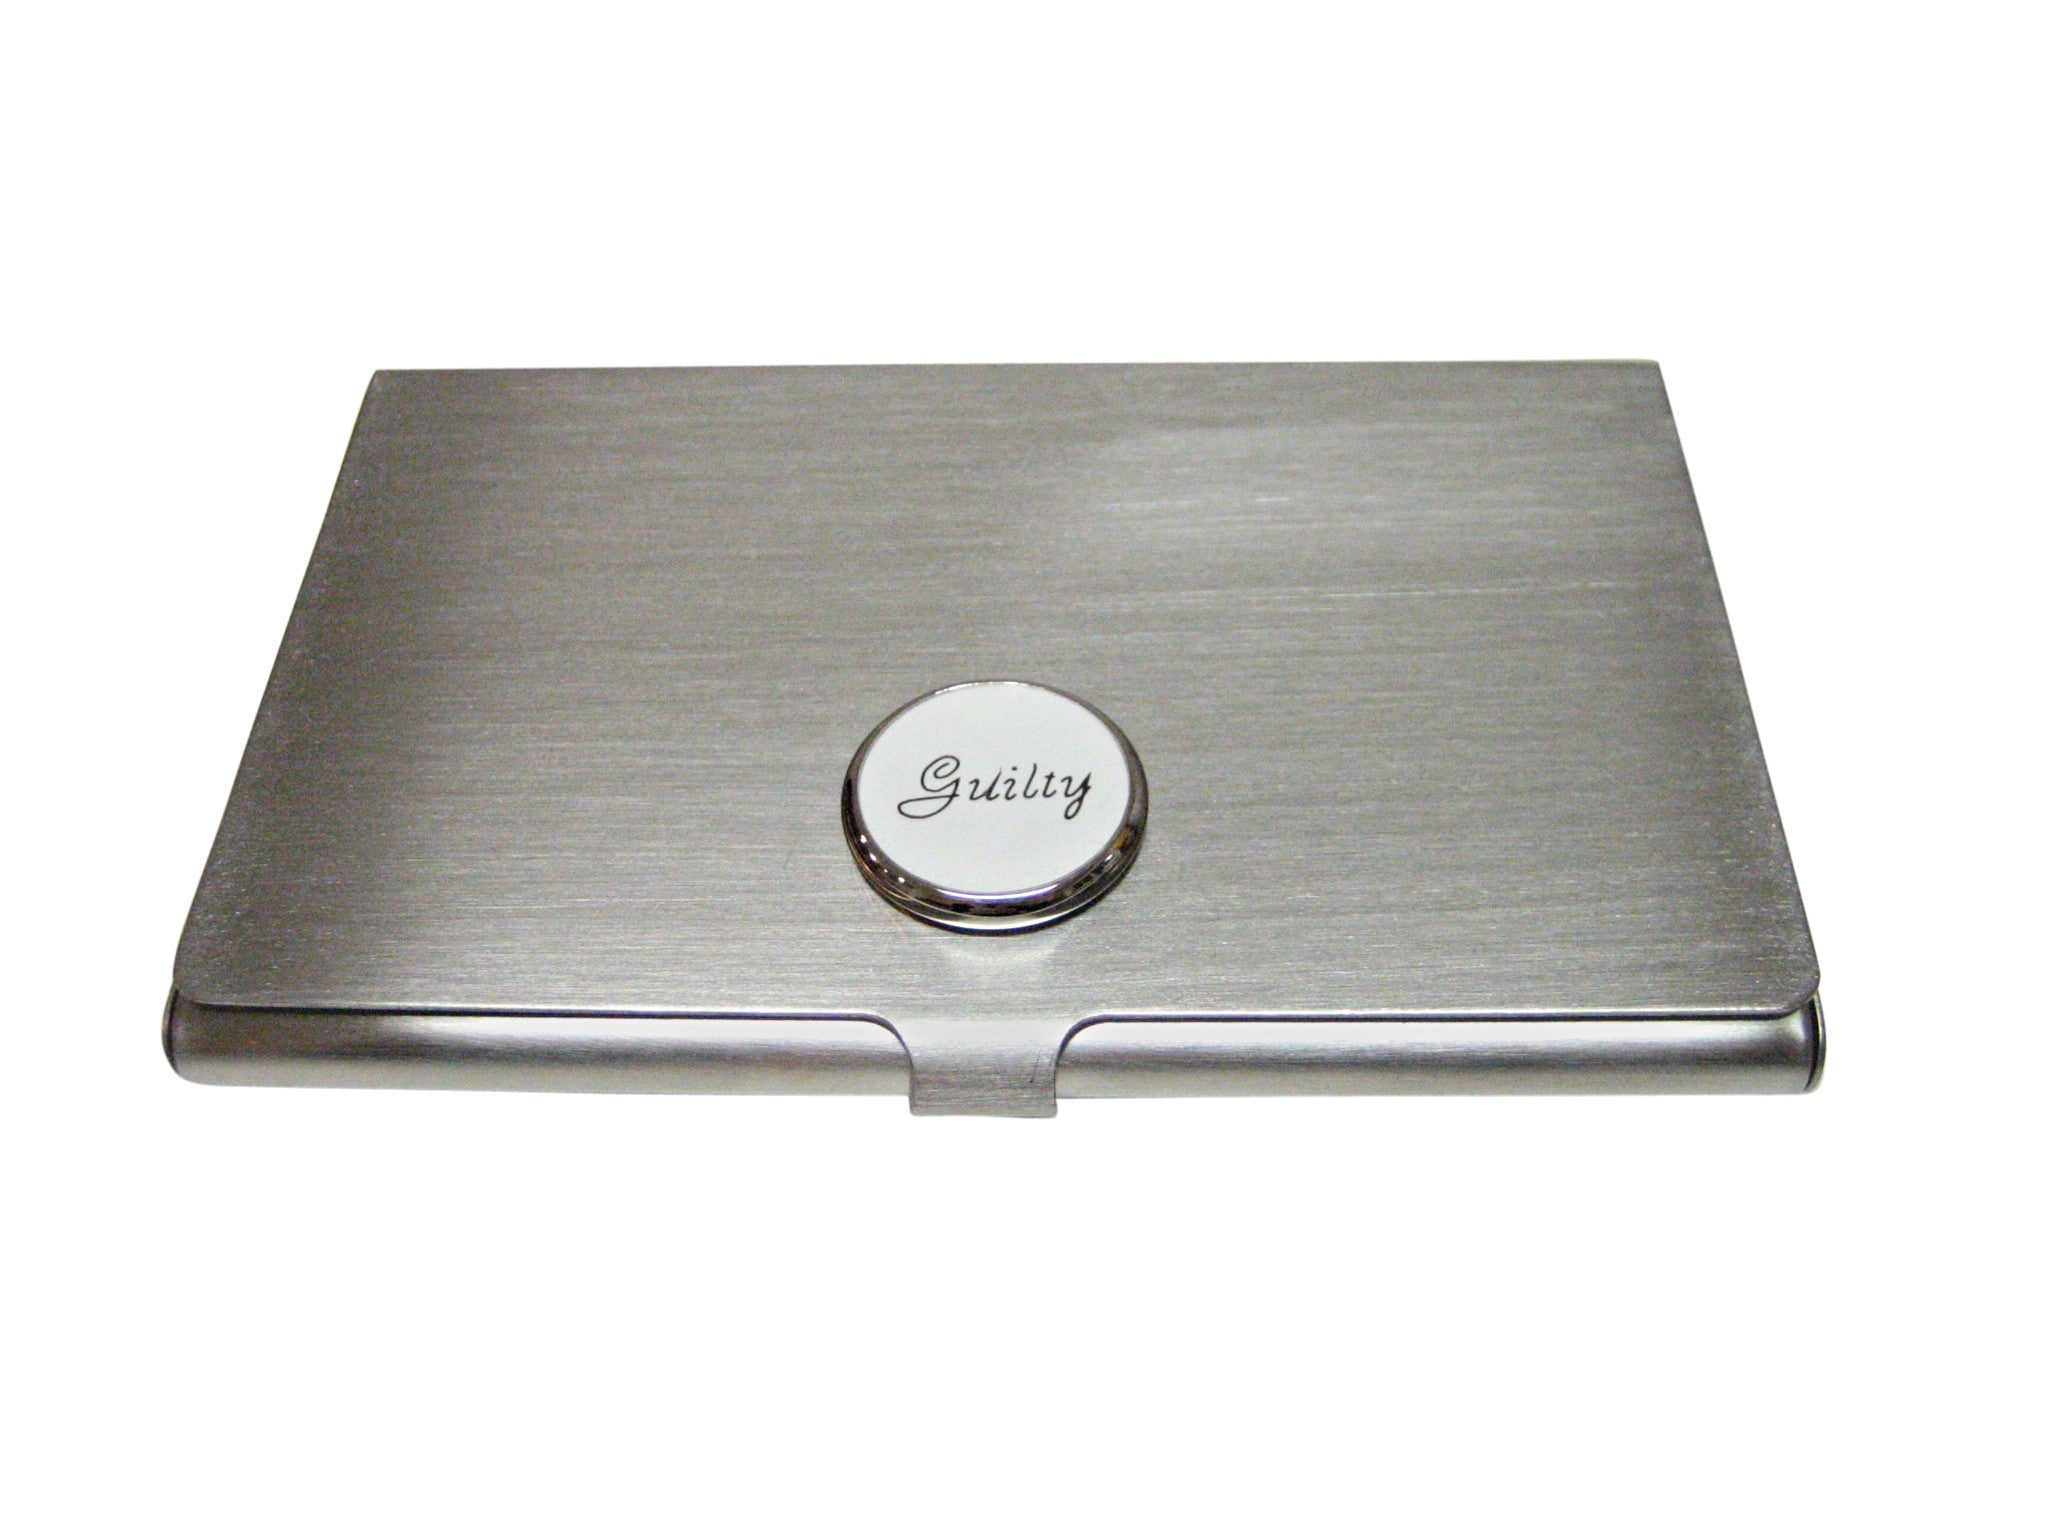 Guilty Law Business Card Holder